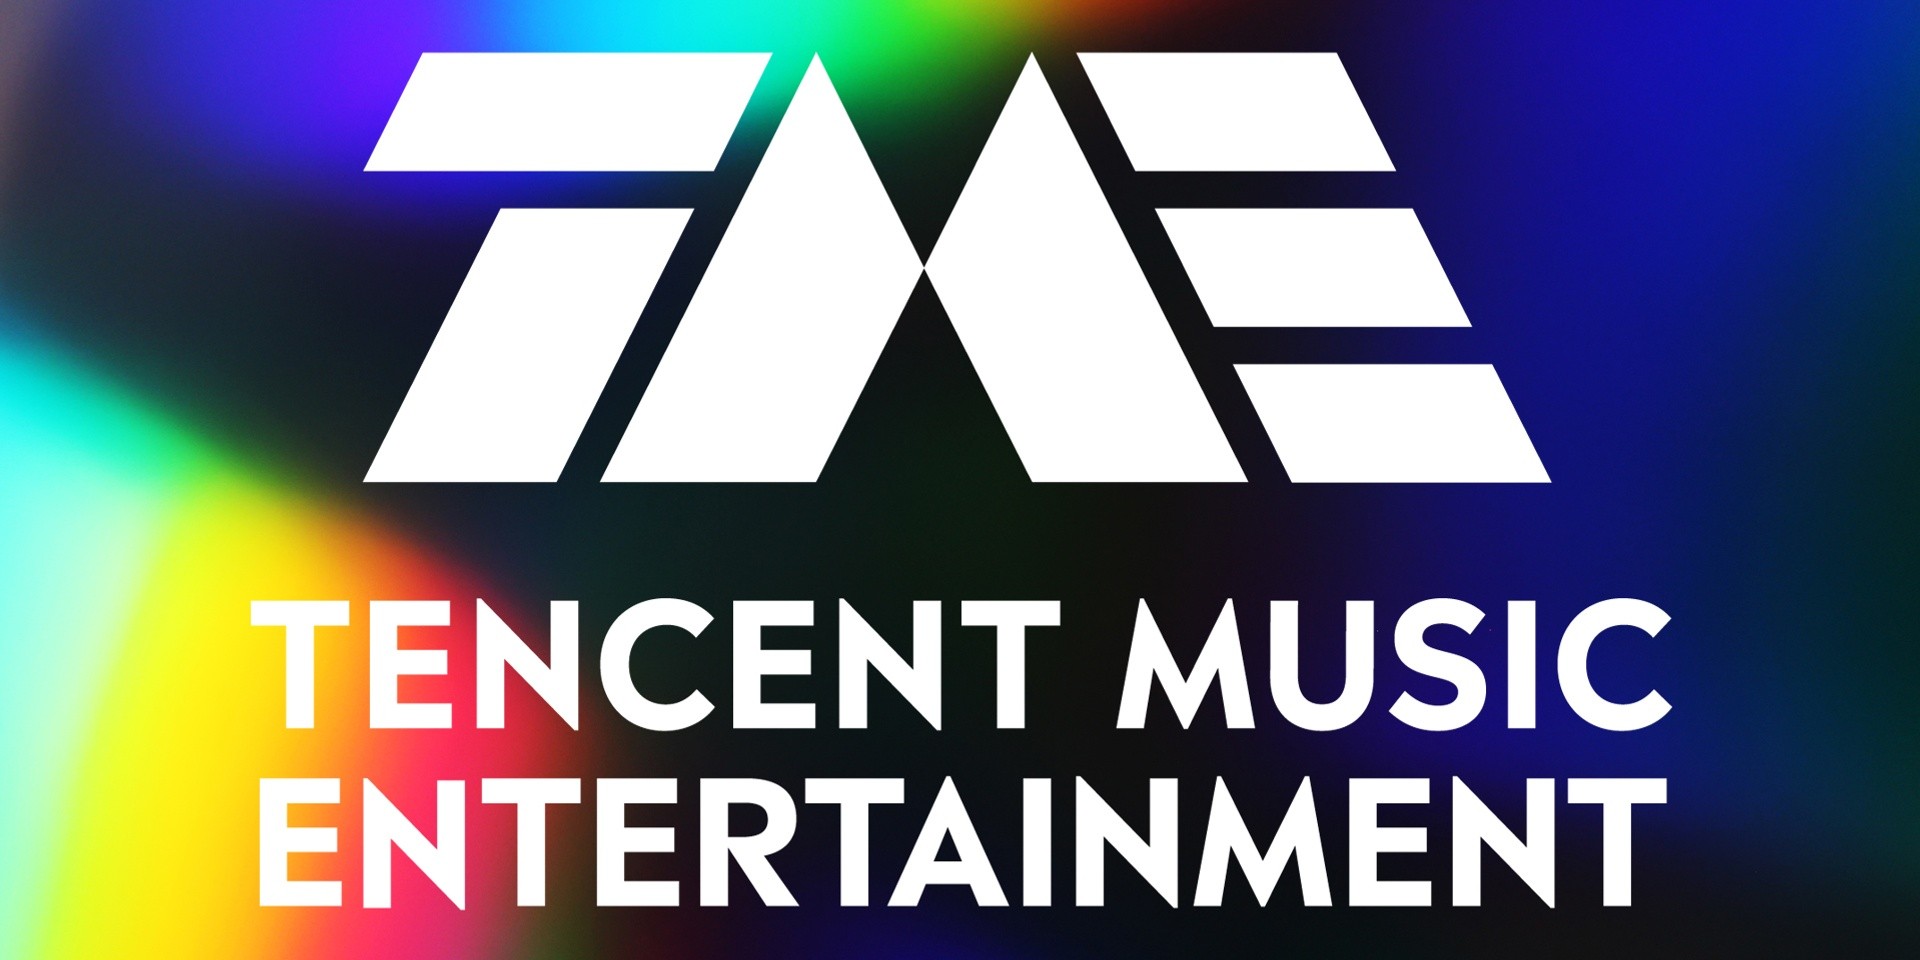 Tencent Music invests in growing long-form audio entertainment ecosystem